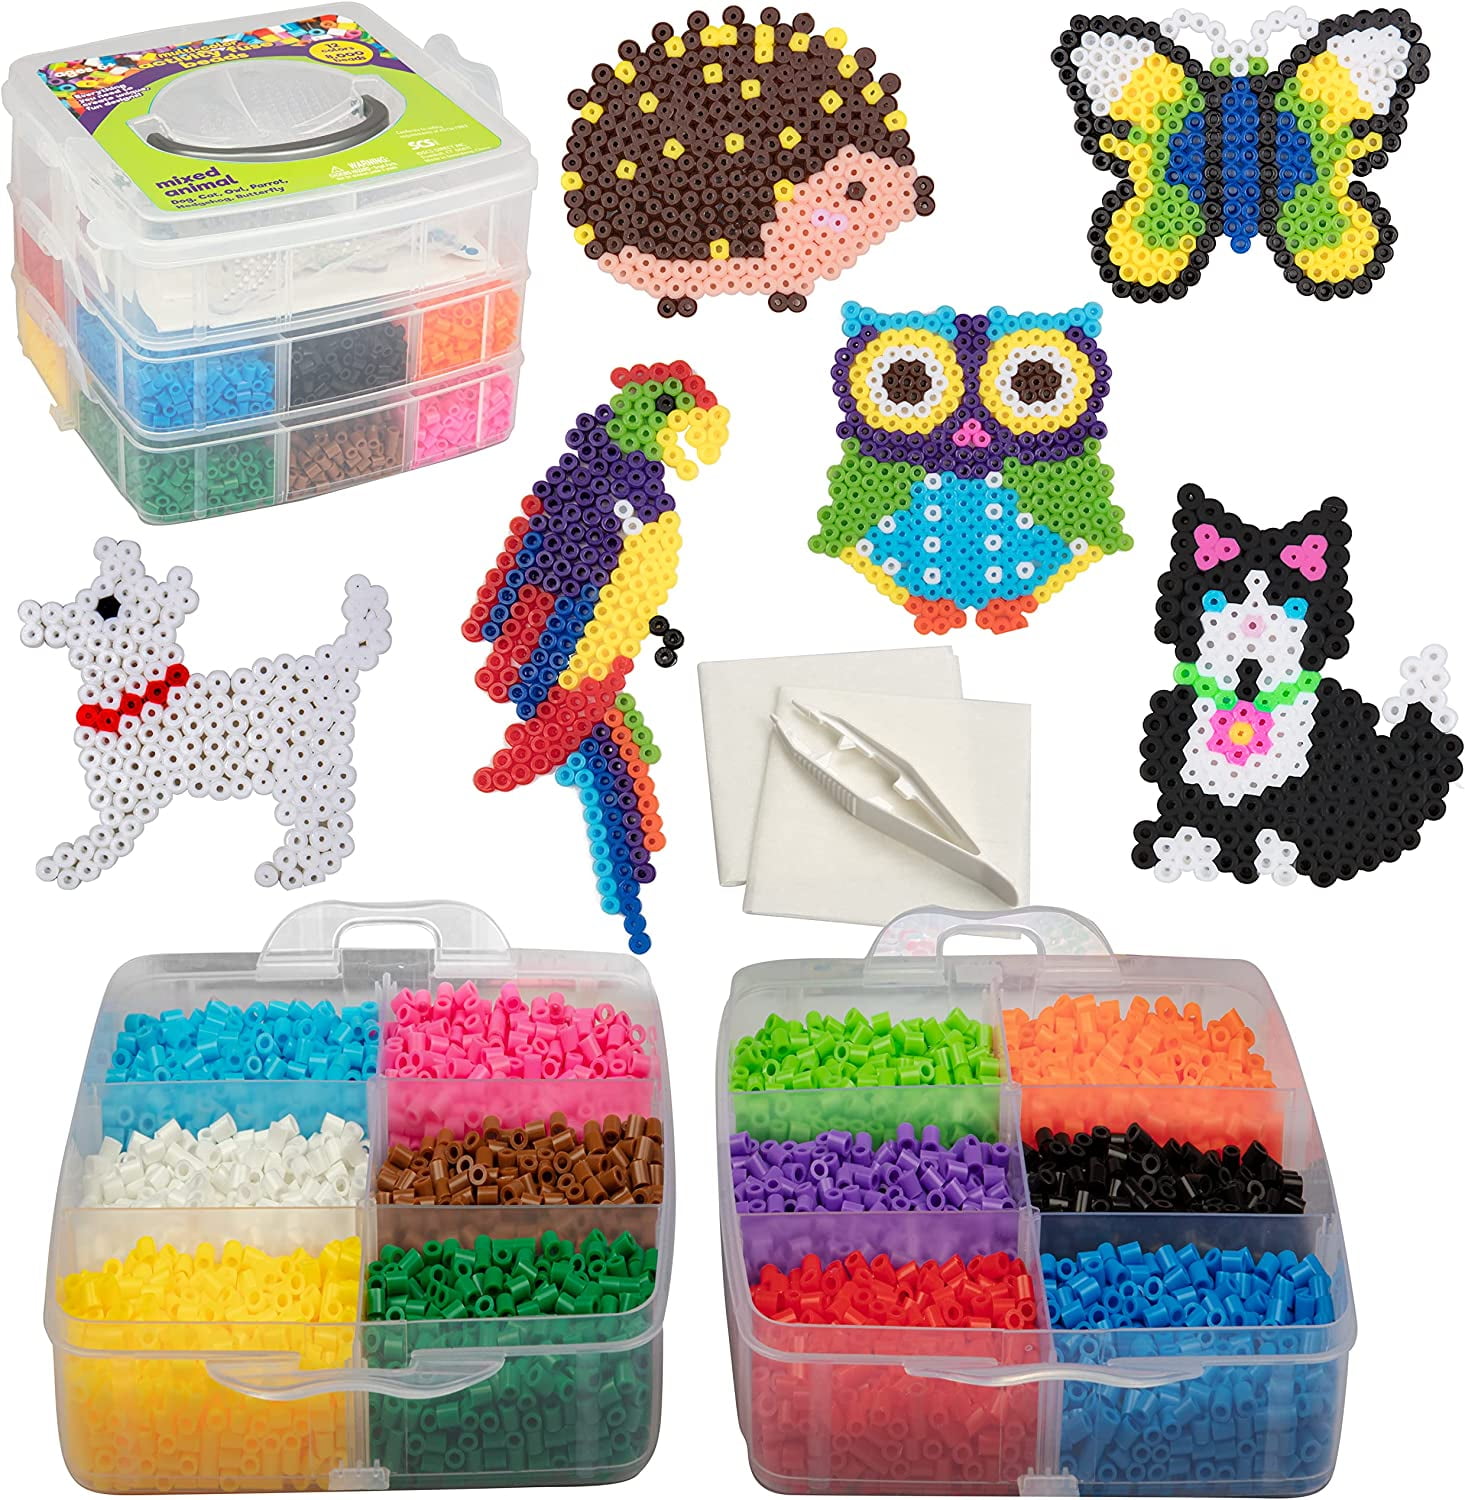 H&W 24 Colors 5mm Fuse Bead Set for Kids, with Color Number & Supply Refill Bag, 2 Tweezers, 2 Big Peg Boards, 5 Ironing Paper, Parts(WA1-Z1)